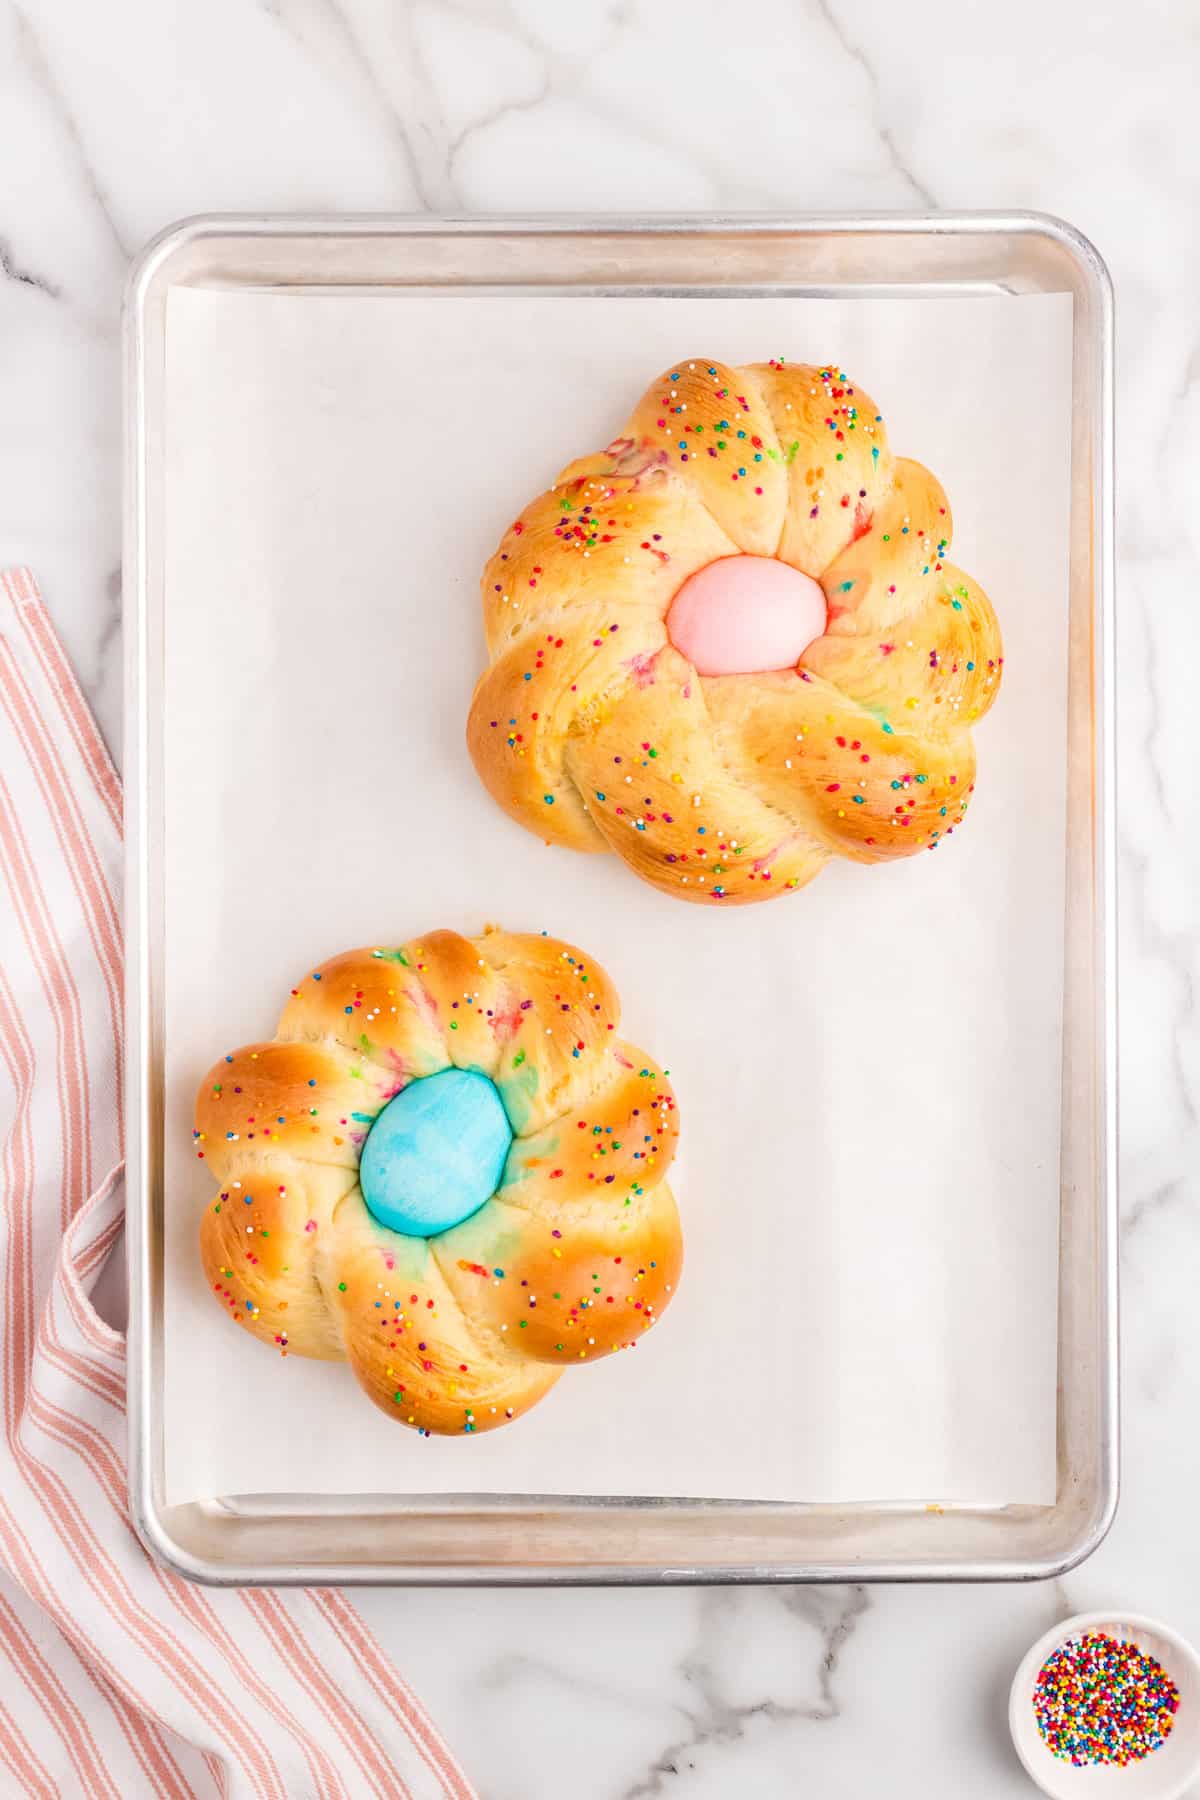 Baked Easter Bread to a perfect golden brown on baking sheet lined with parchment paper